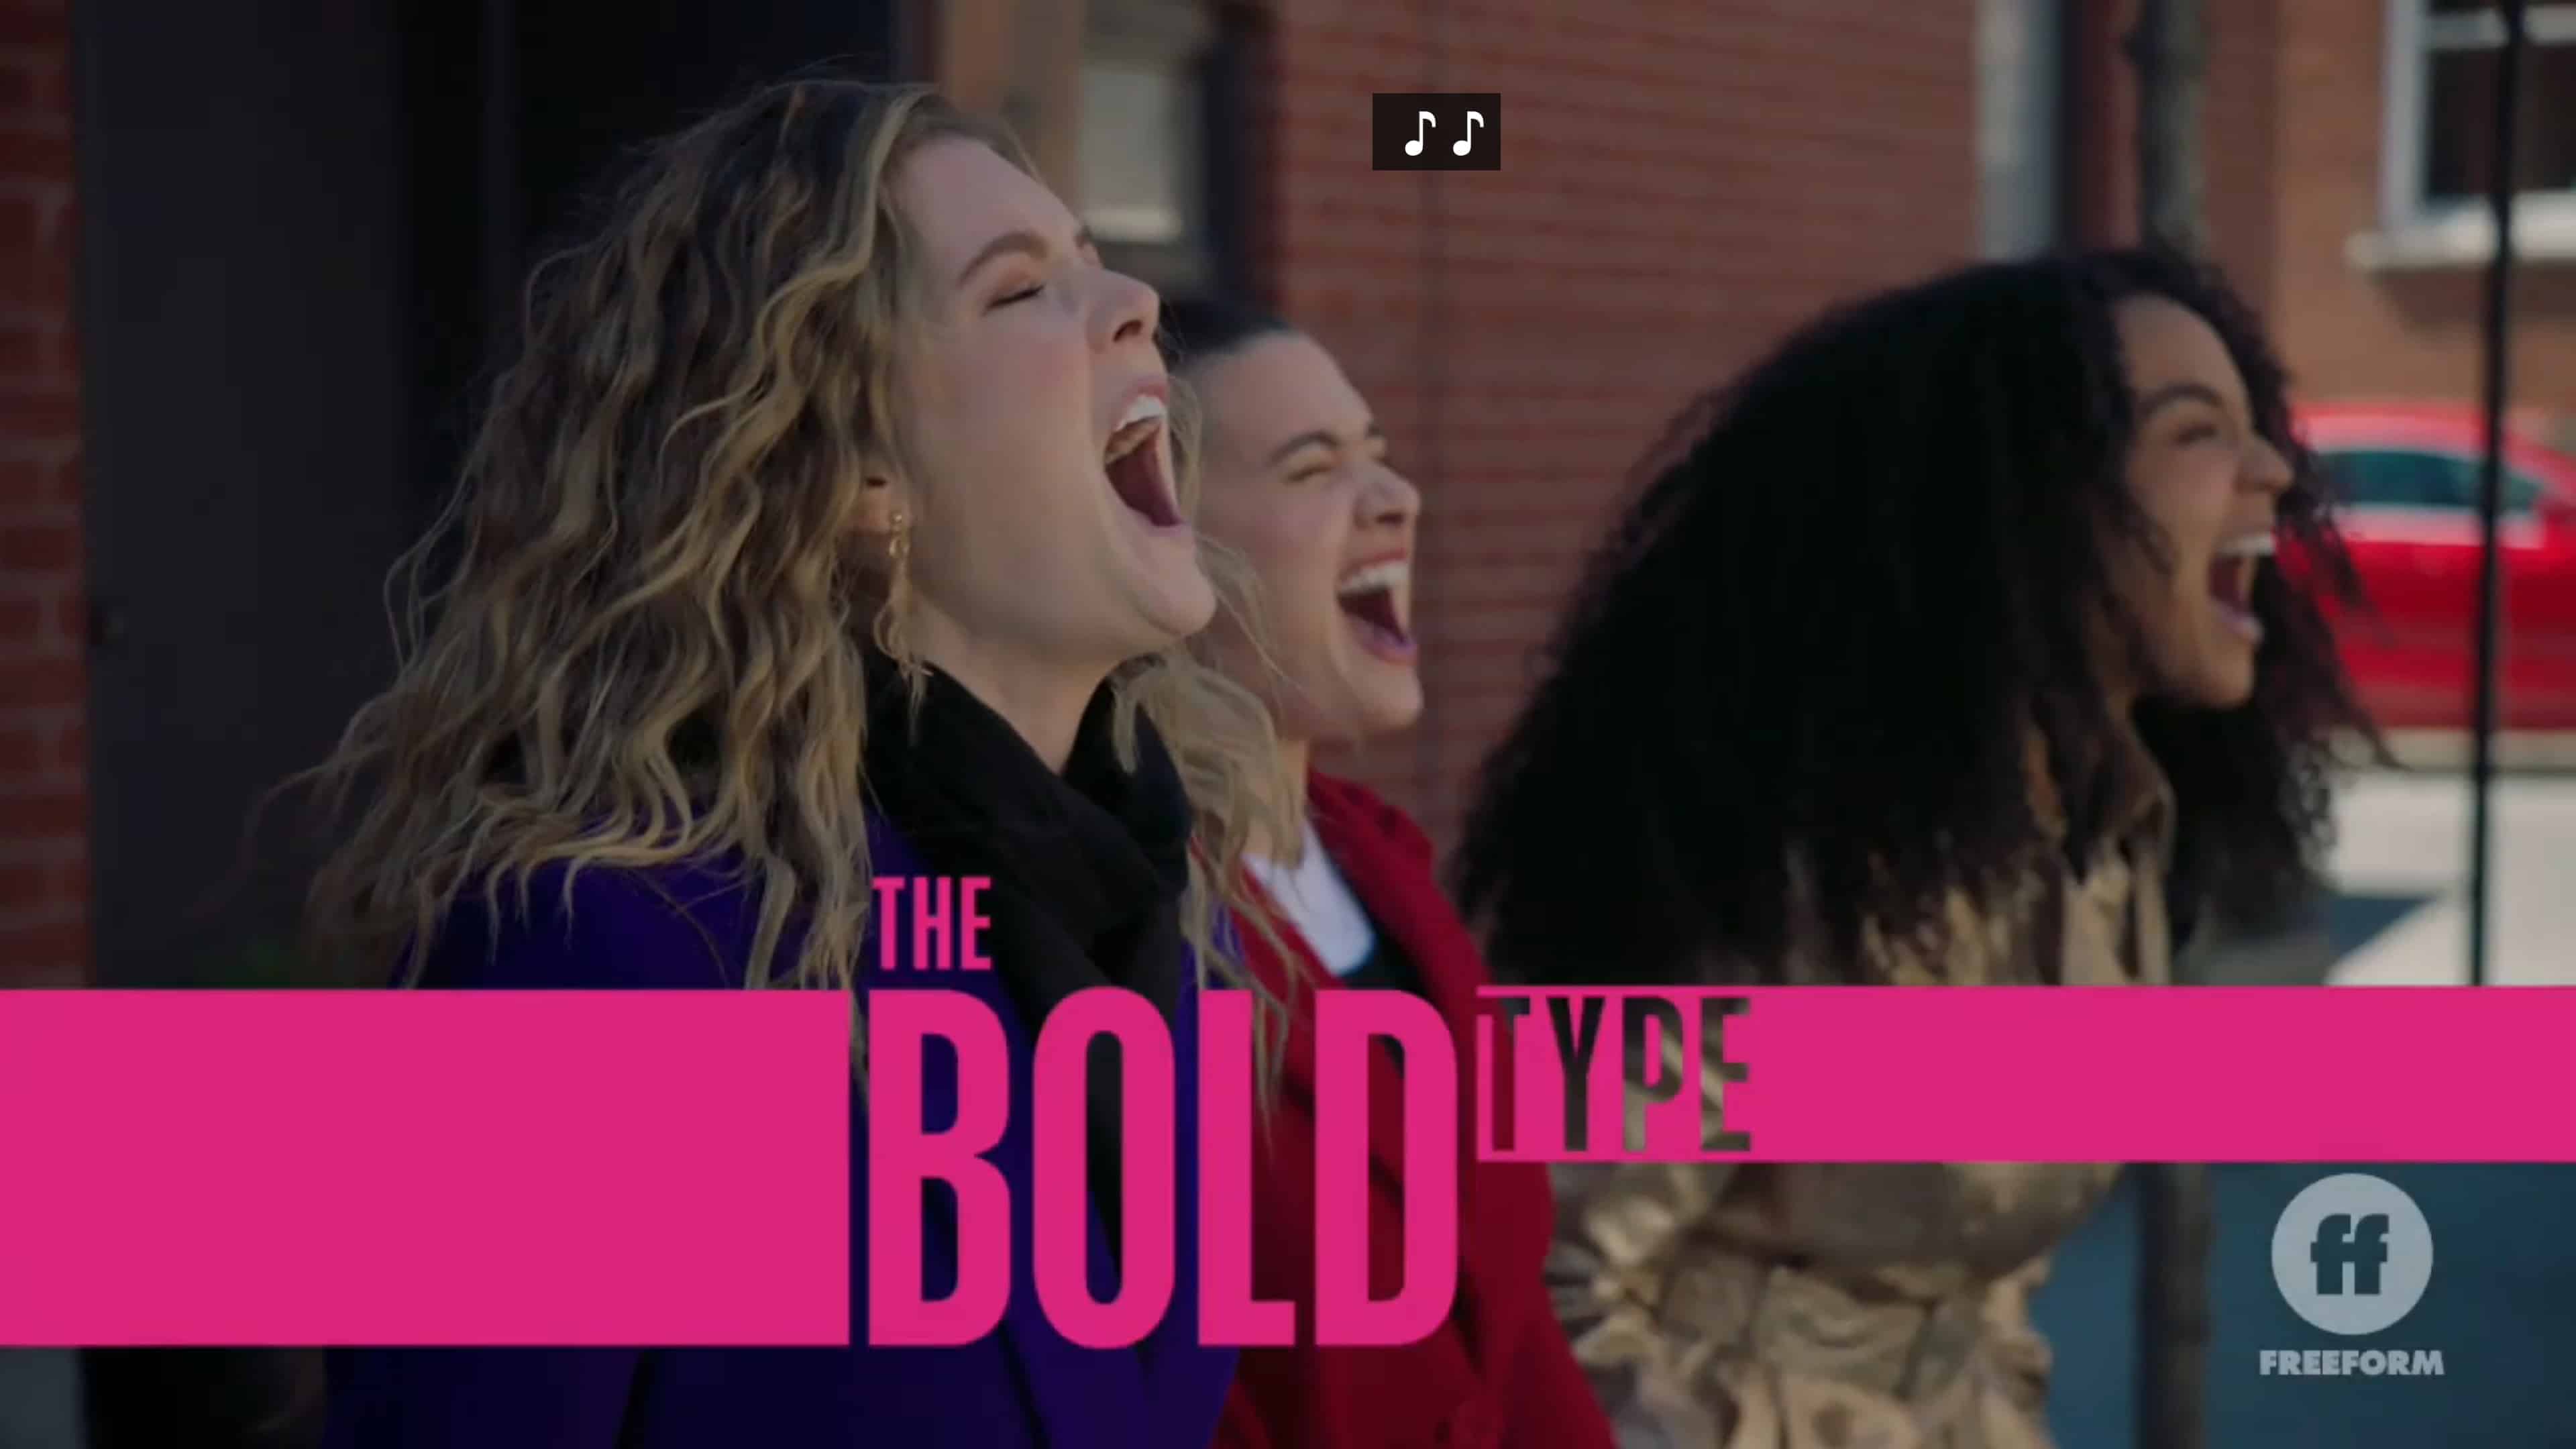 The Bold Type: Season 5/ Episode 6 [Finale] – Recap/ Review (with Spoilers)